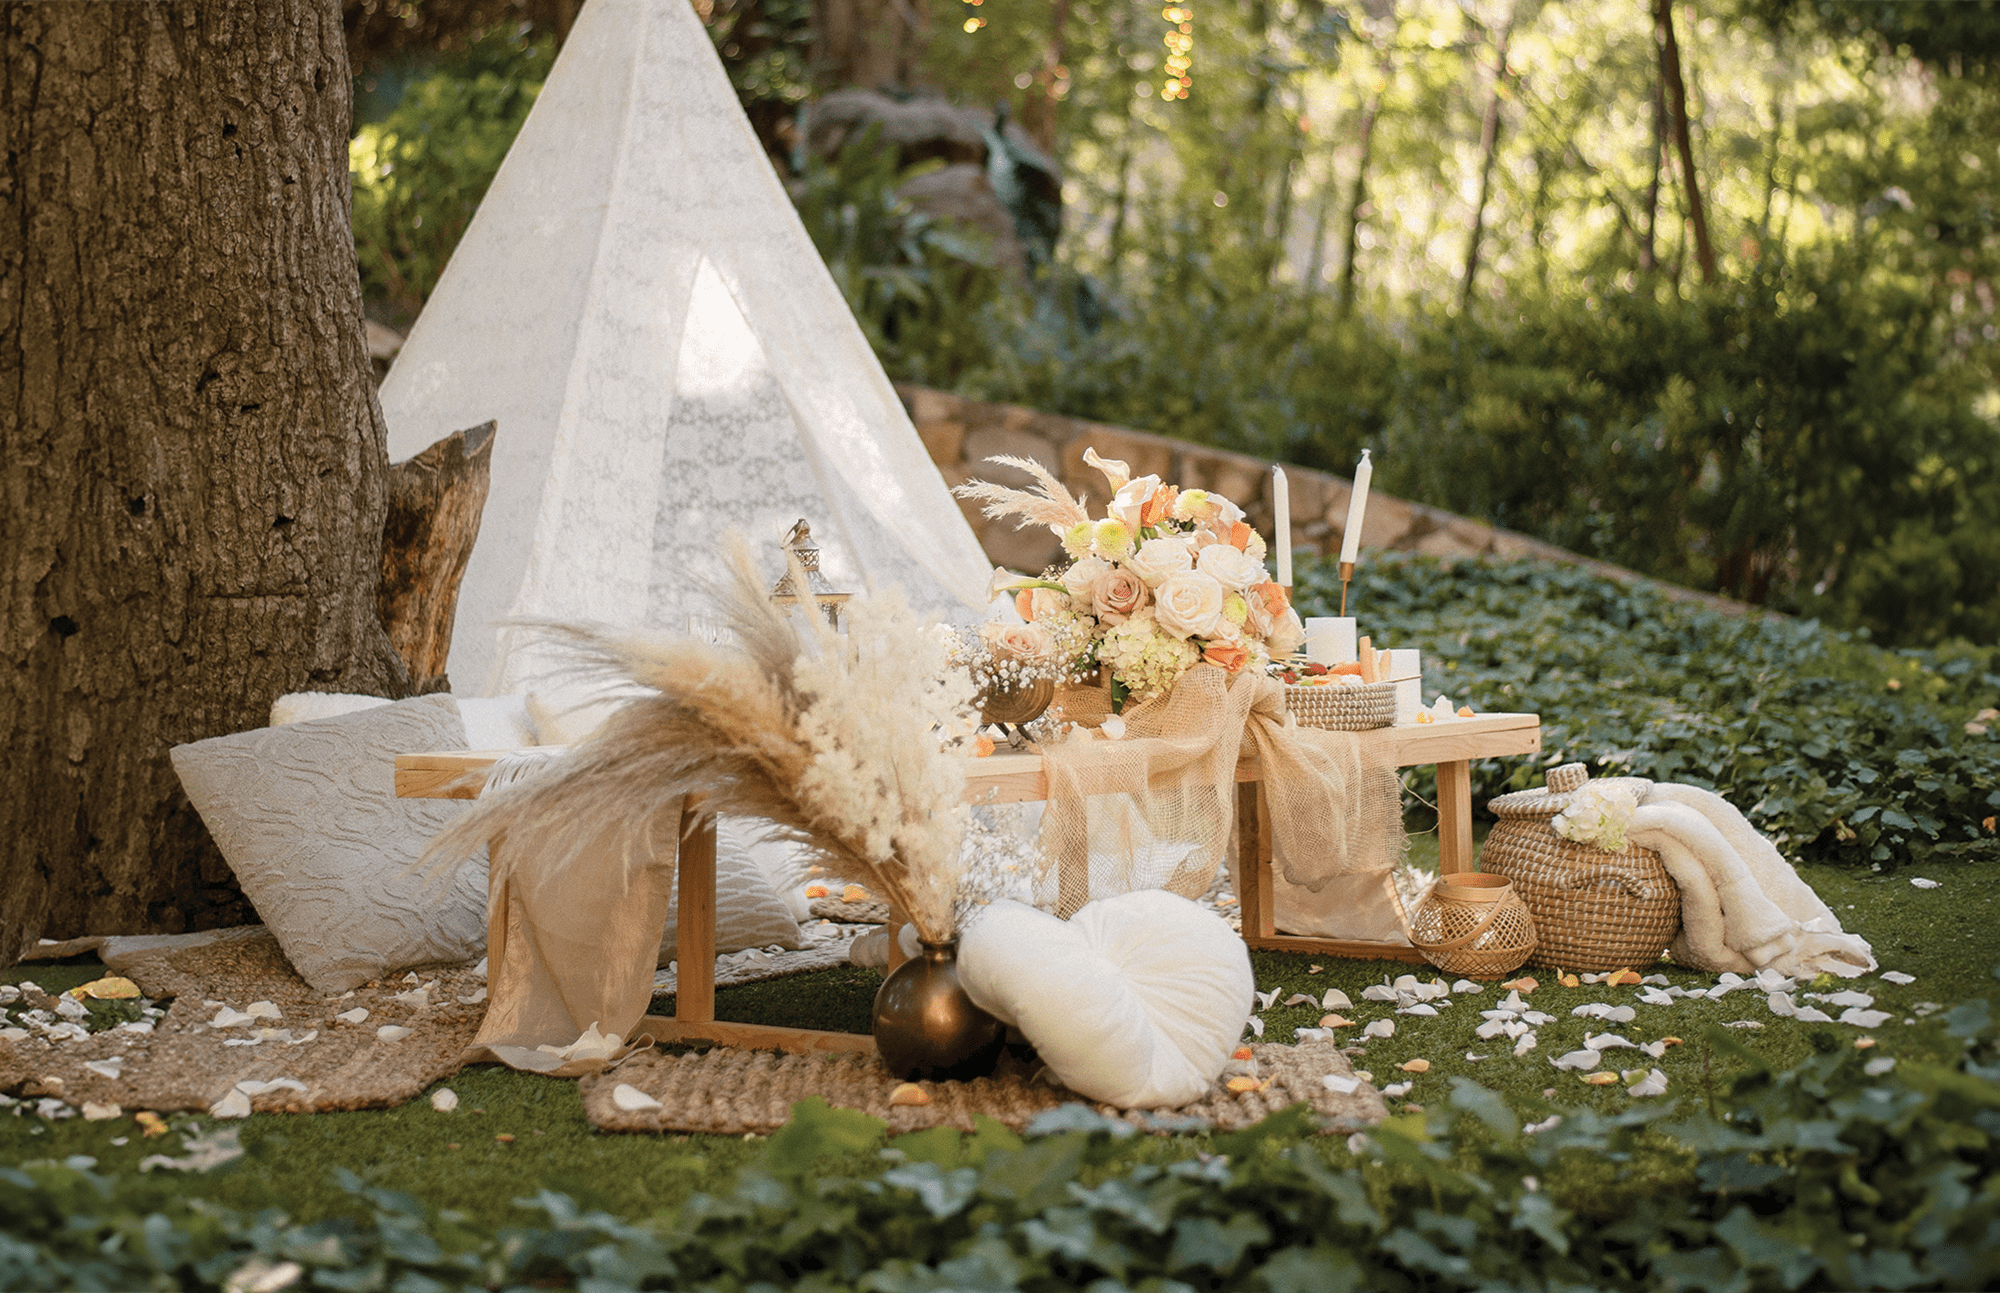 Scenic boho-beach aesthetic by Pop-Up Parties using vintage linens and glassware